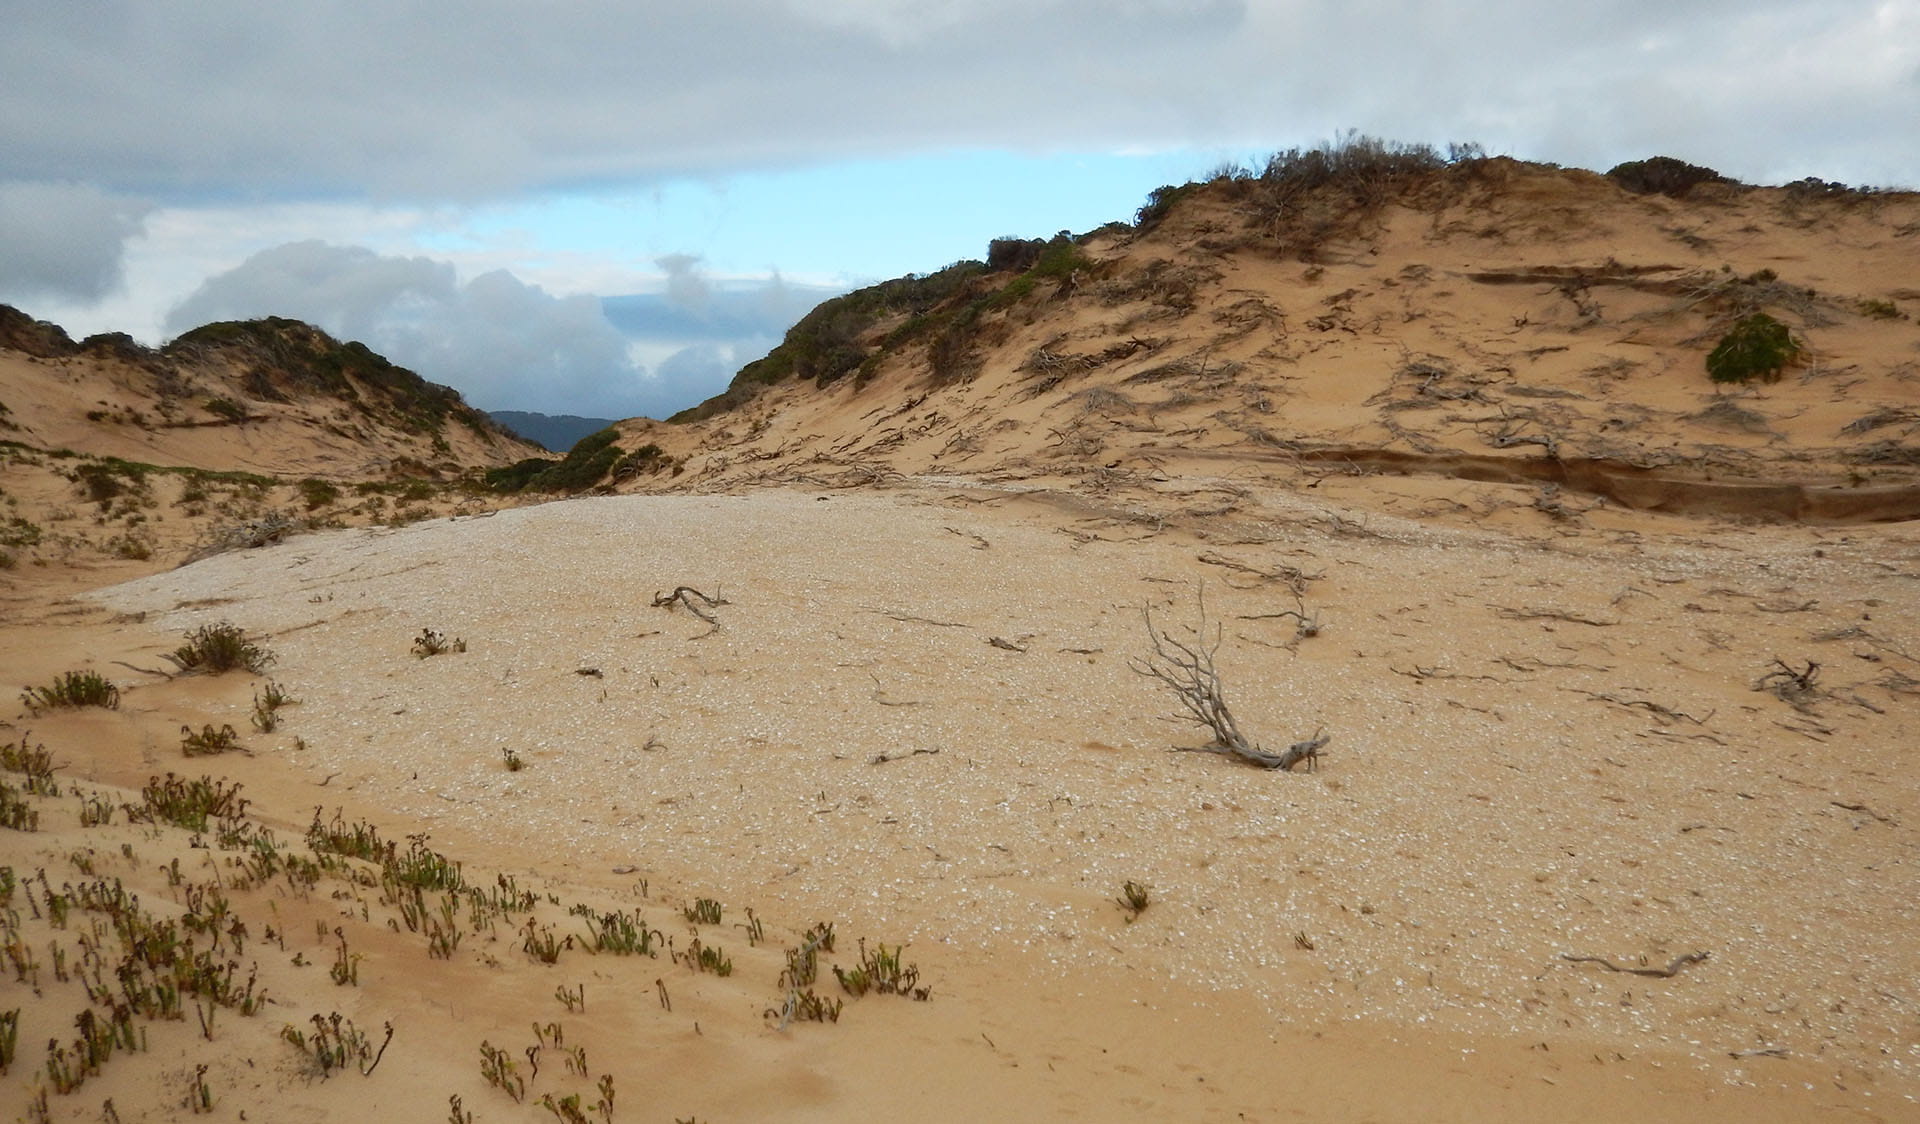 A sand dune covered in the remnants of white shells